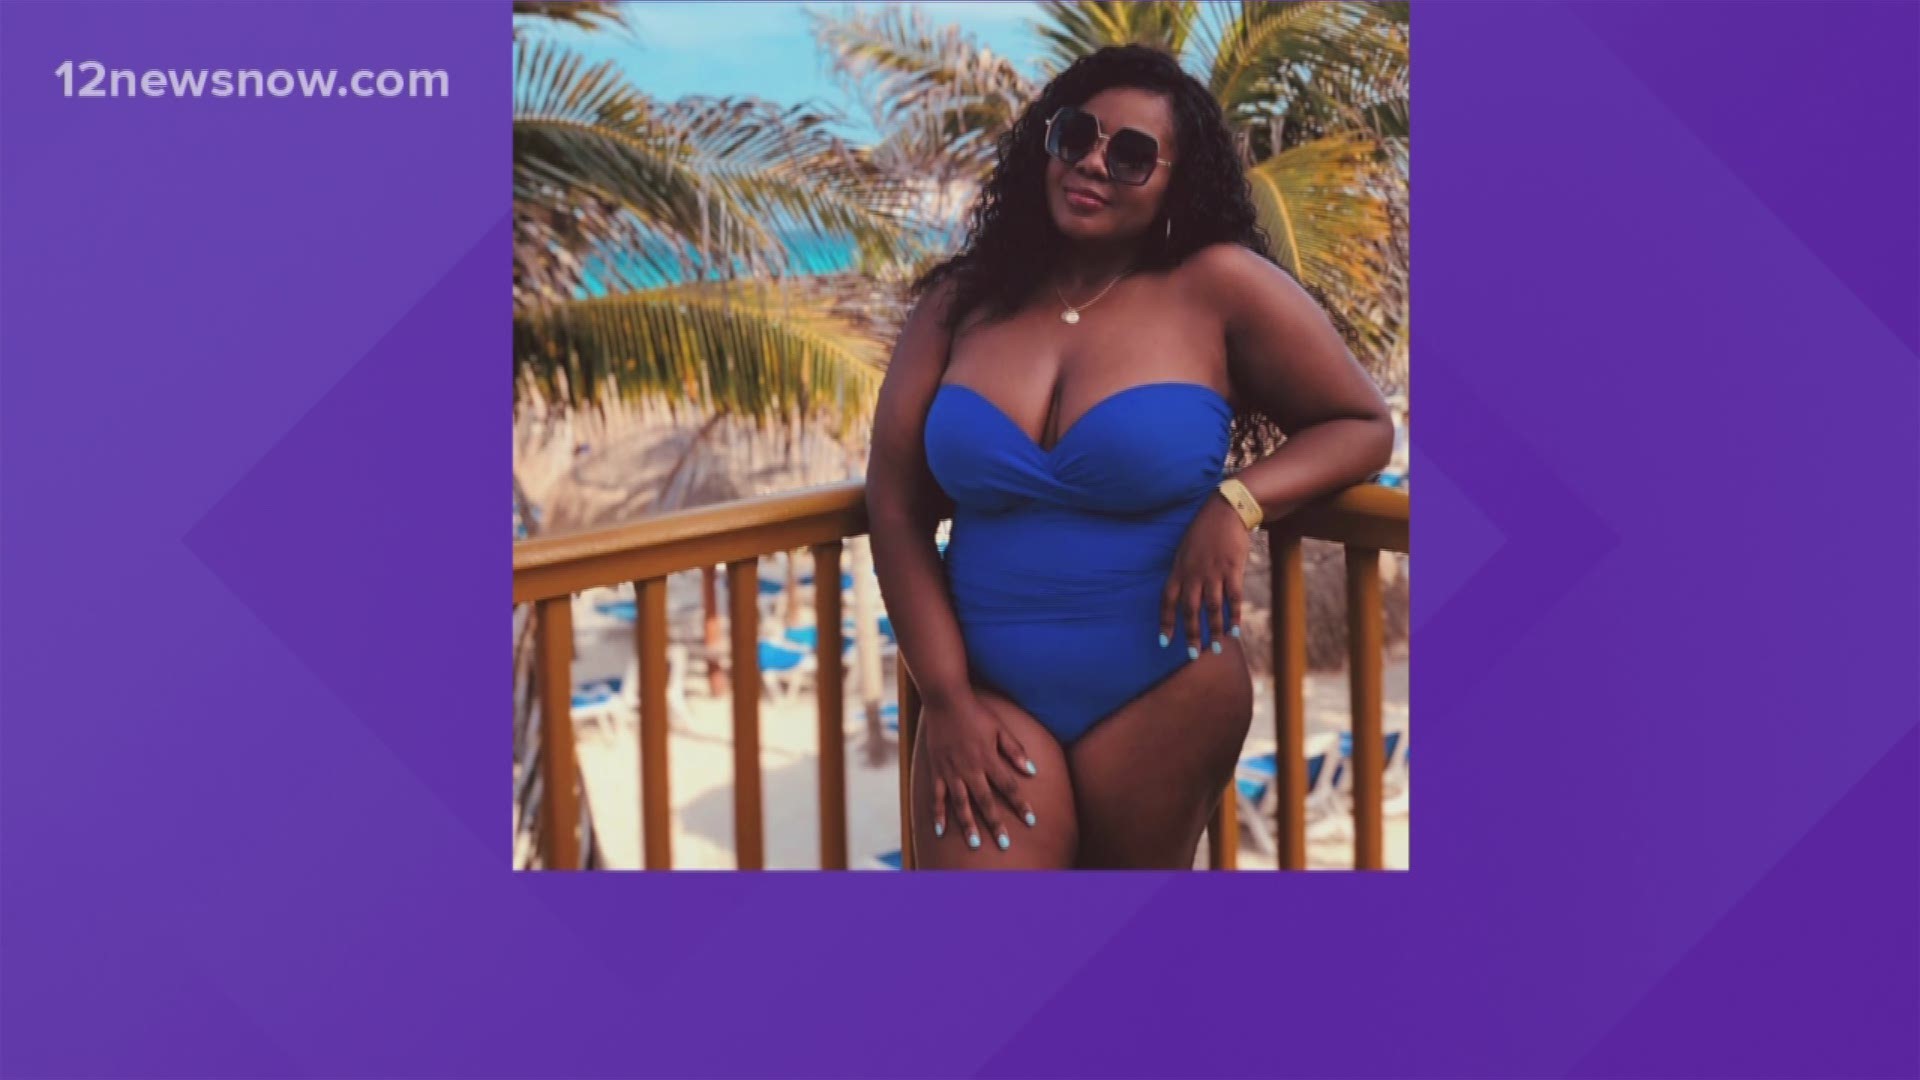 Make sure you're ready with the latest swimsuit trends as you make your way to the pool or beach!